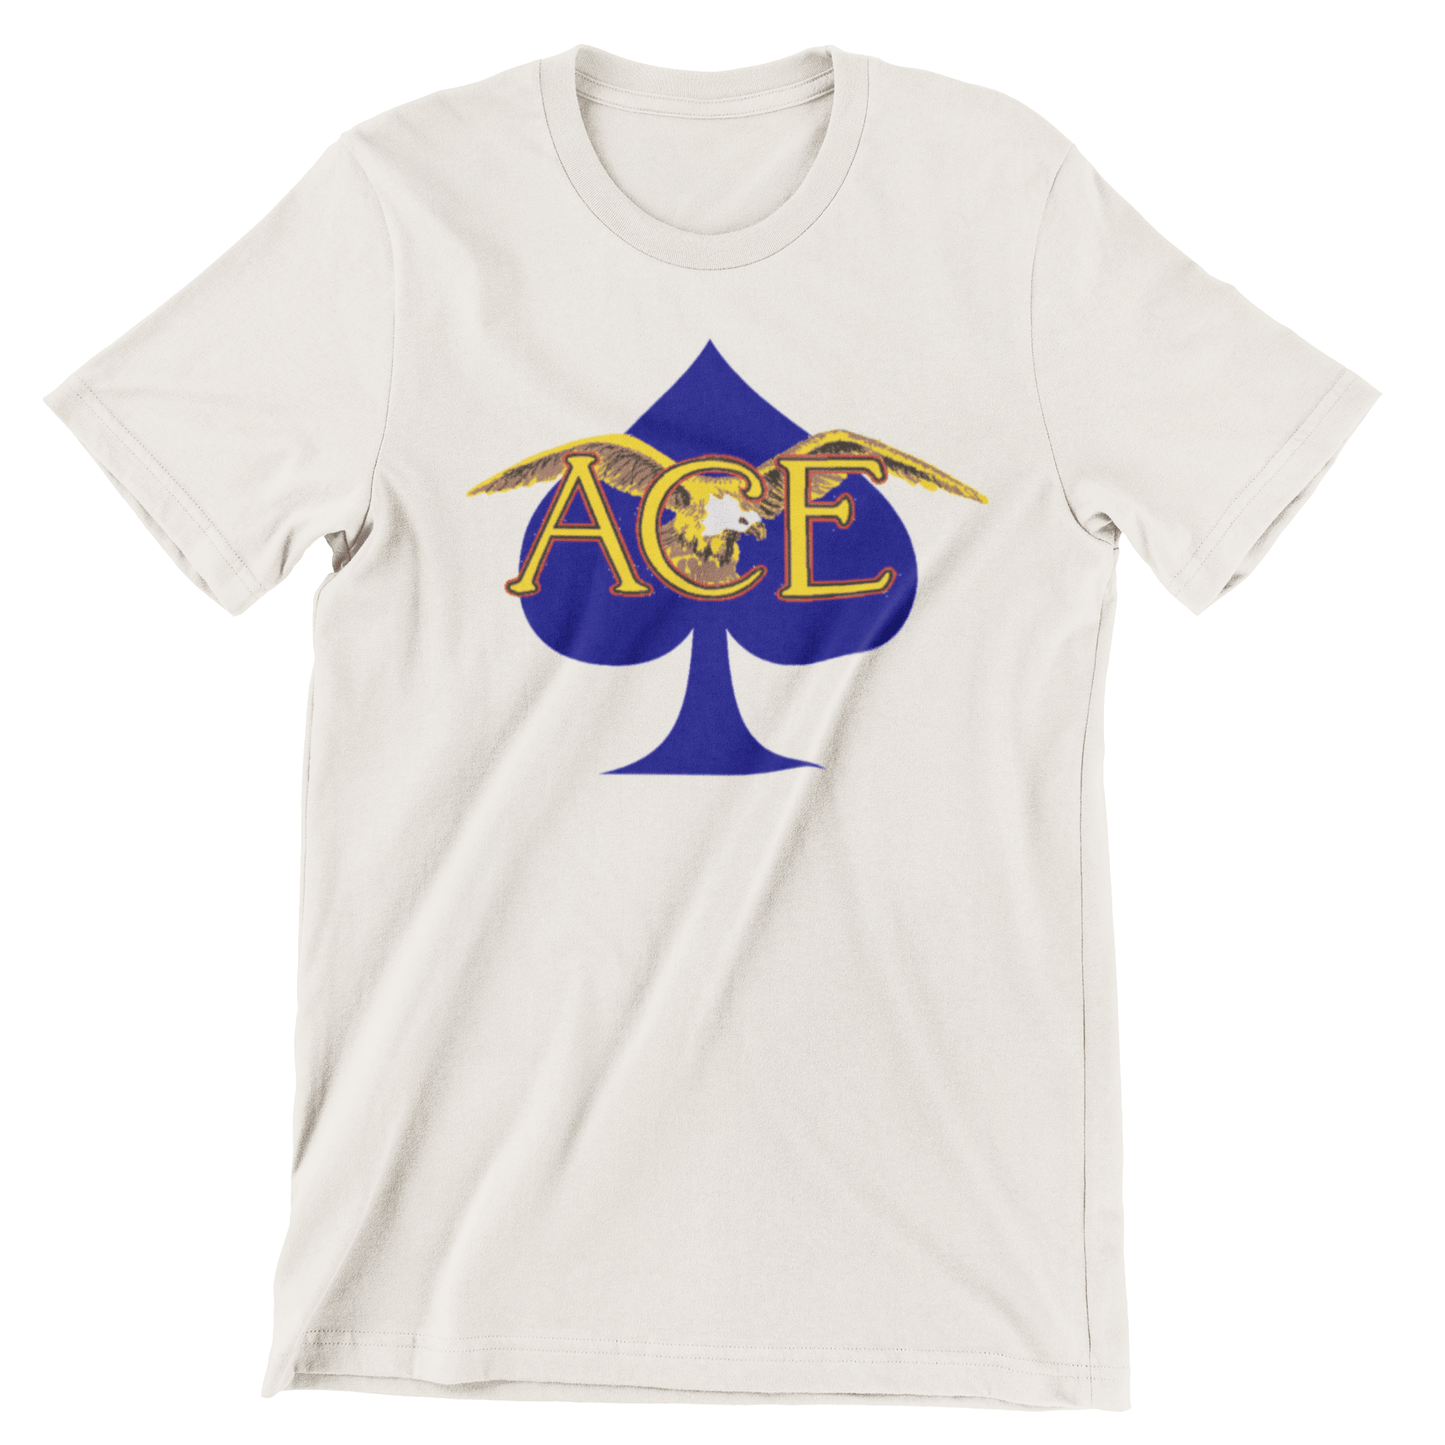 Ace Motorcycle Vintage Logo t shirt (Limited Edition) t shirts https://www.teepublic.com/t-shirt/43804336-boys-have-a-penis?store_id=1283499 TEE PUBLIC